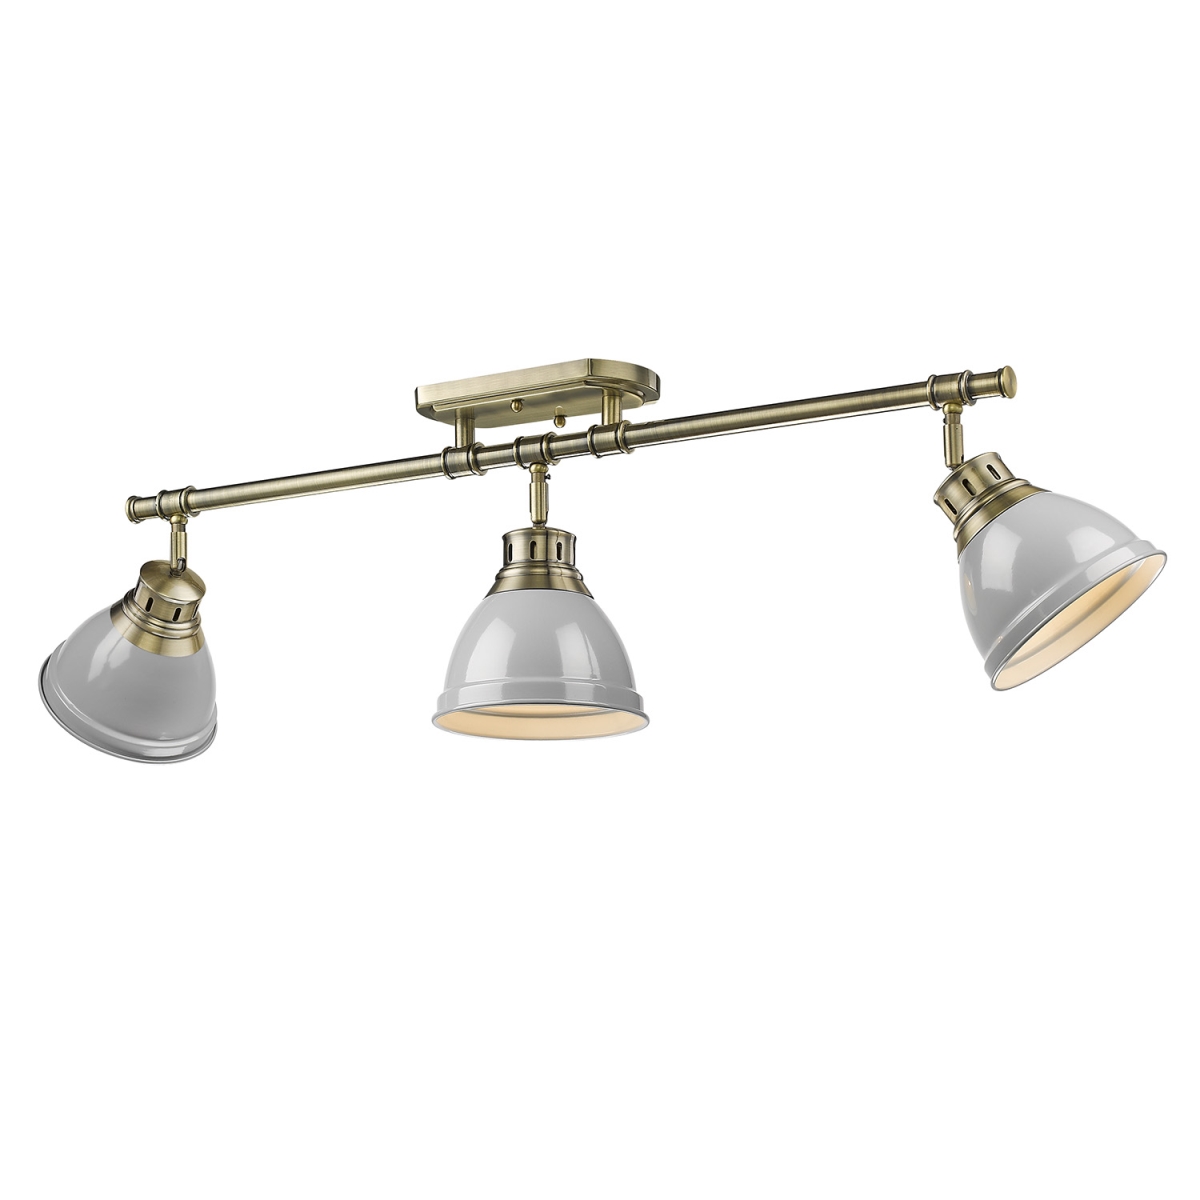 3602-3sf Ab-gy Duncan 3 Light Semi-flush Track With Gray Shades, Aged Brass